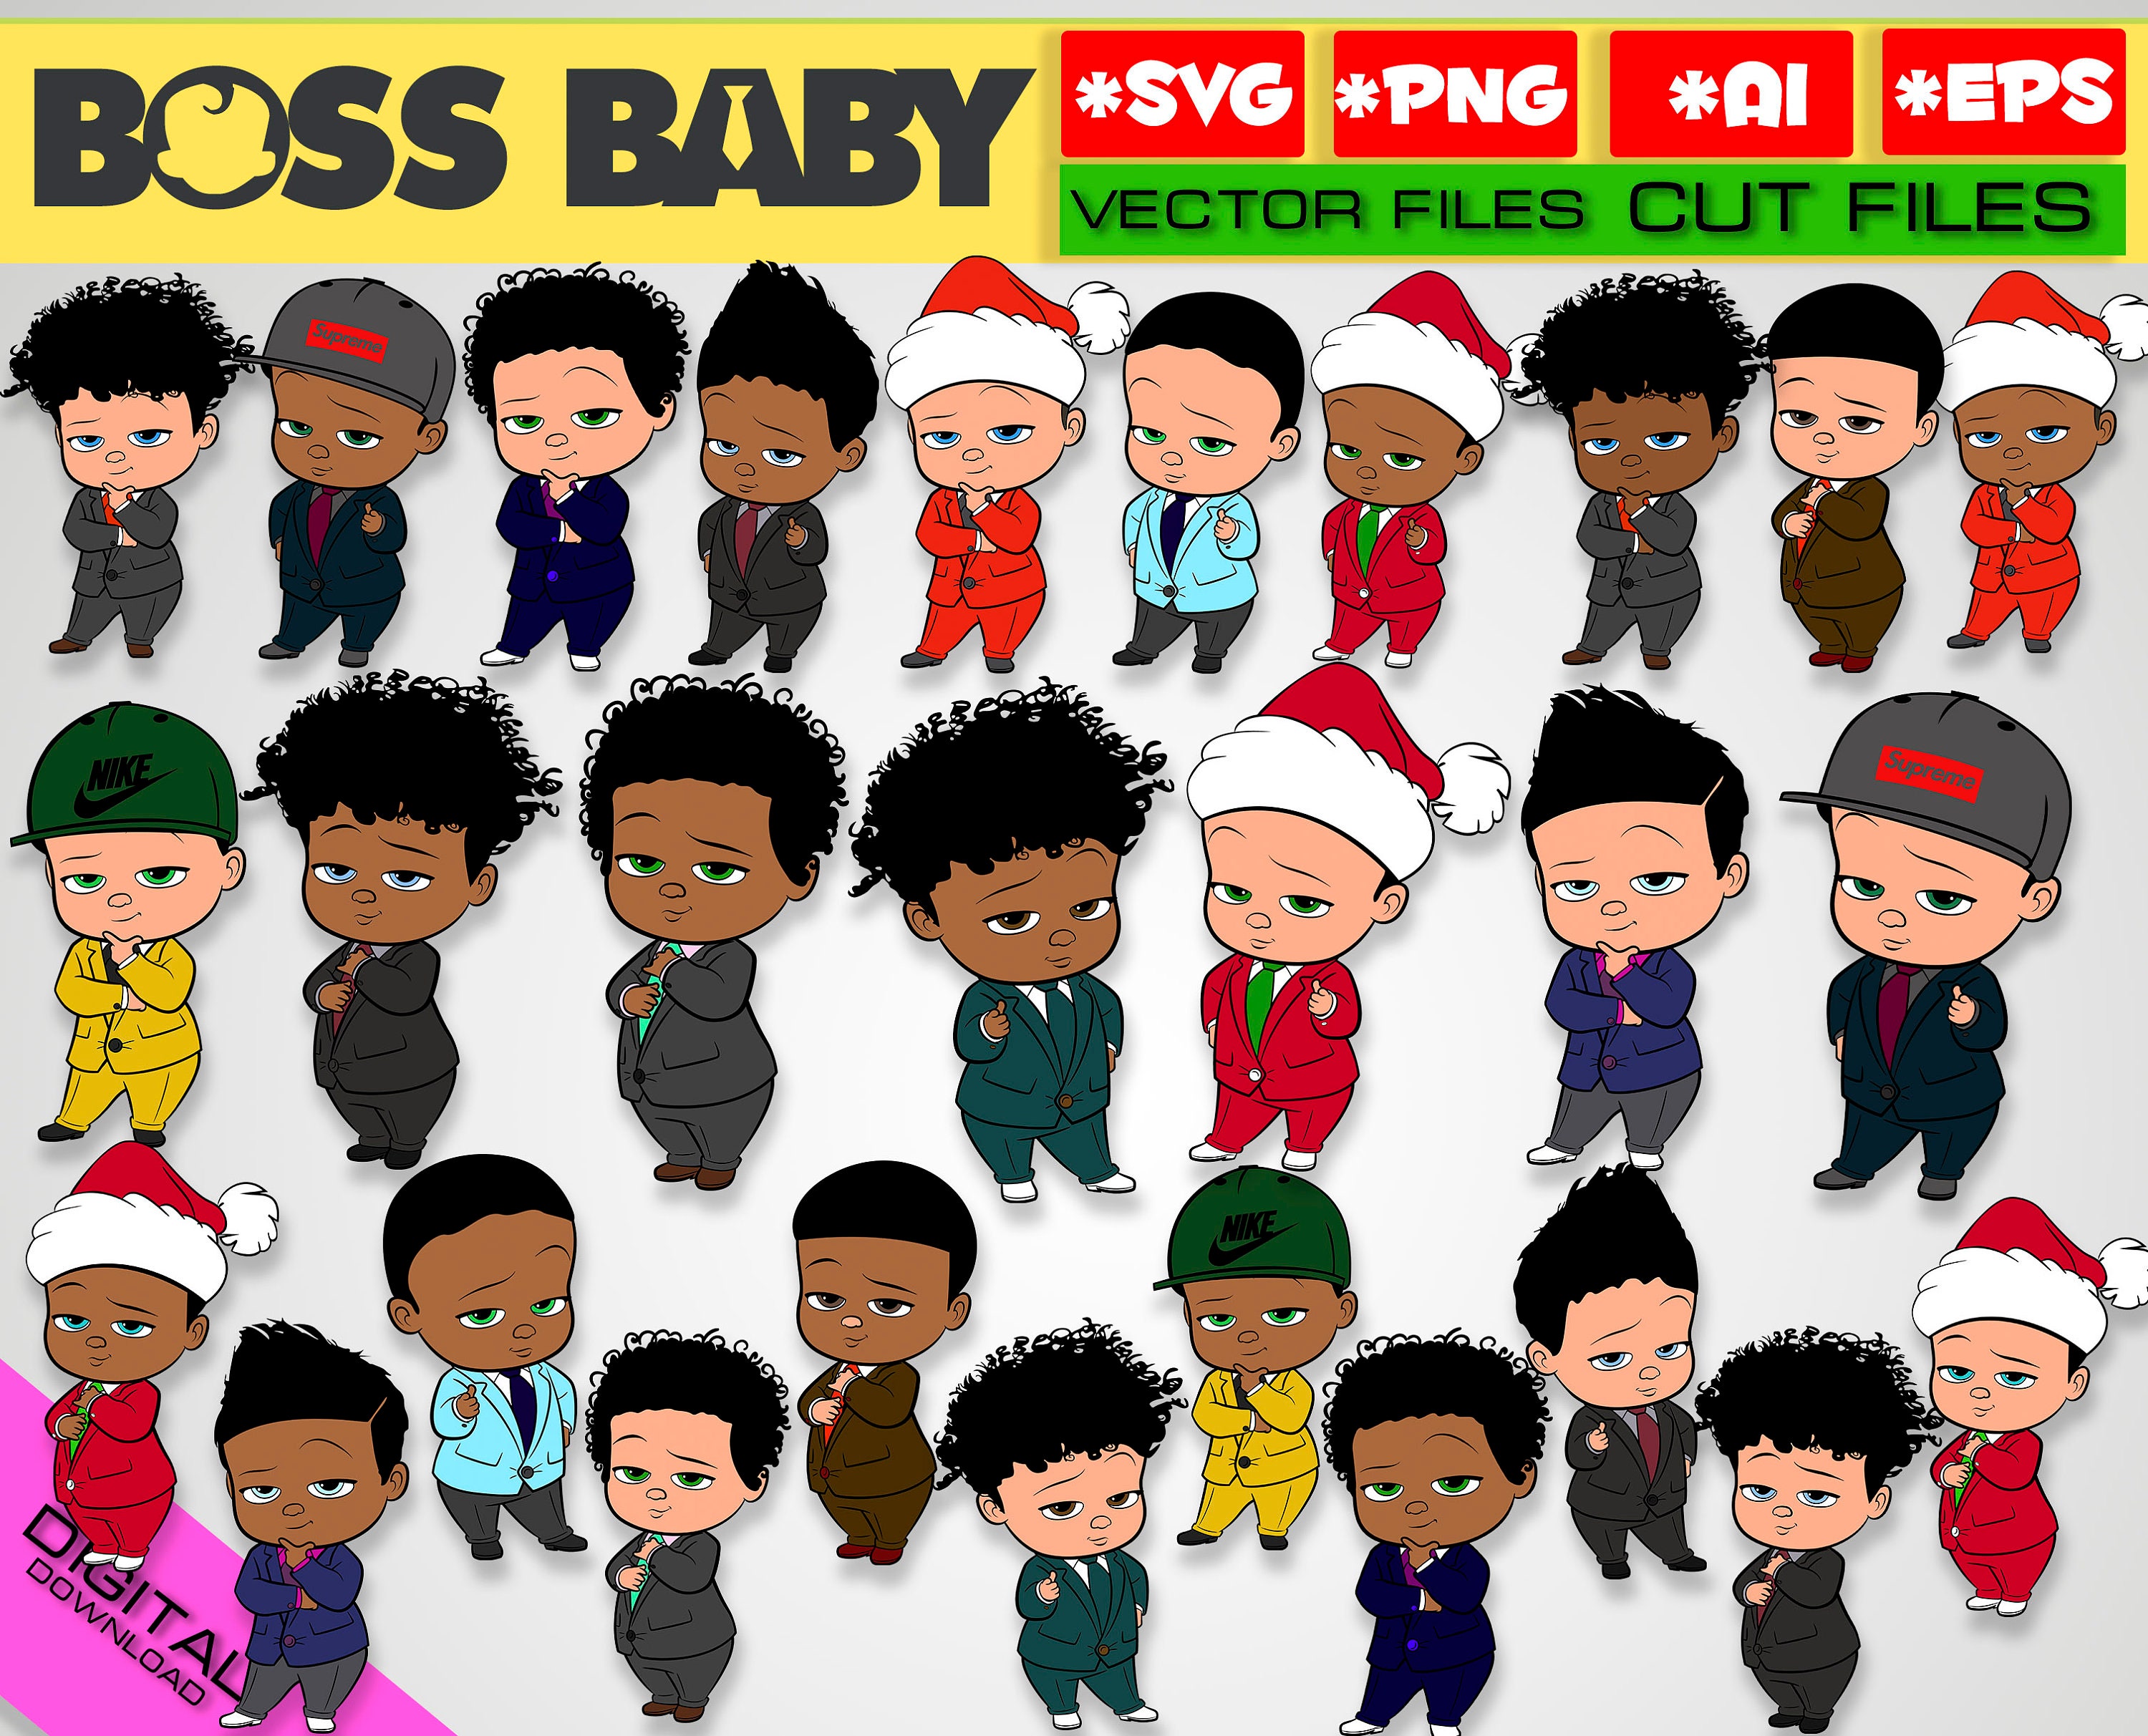 Download The Boss Baby svg png boss baby svg boss baby party ...